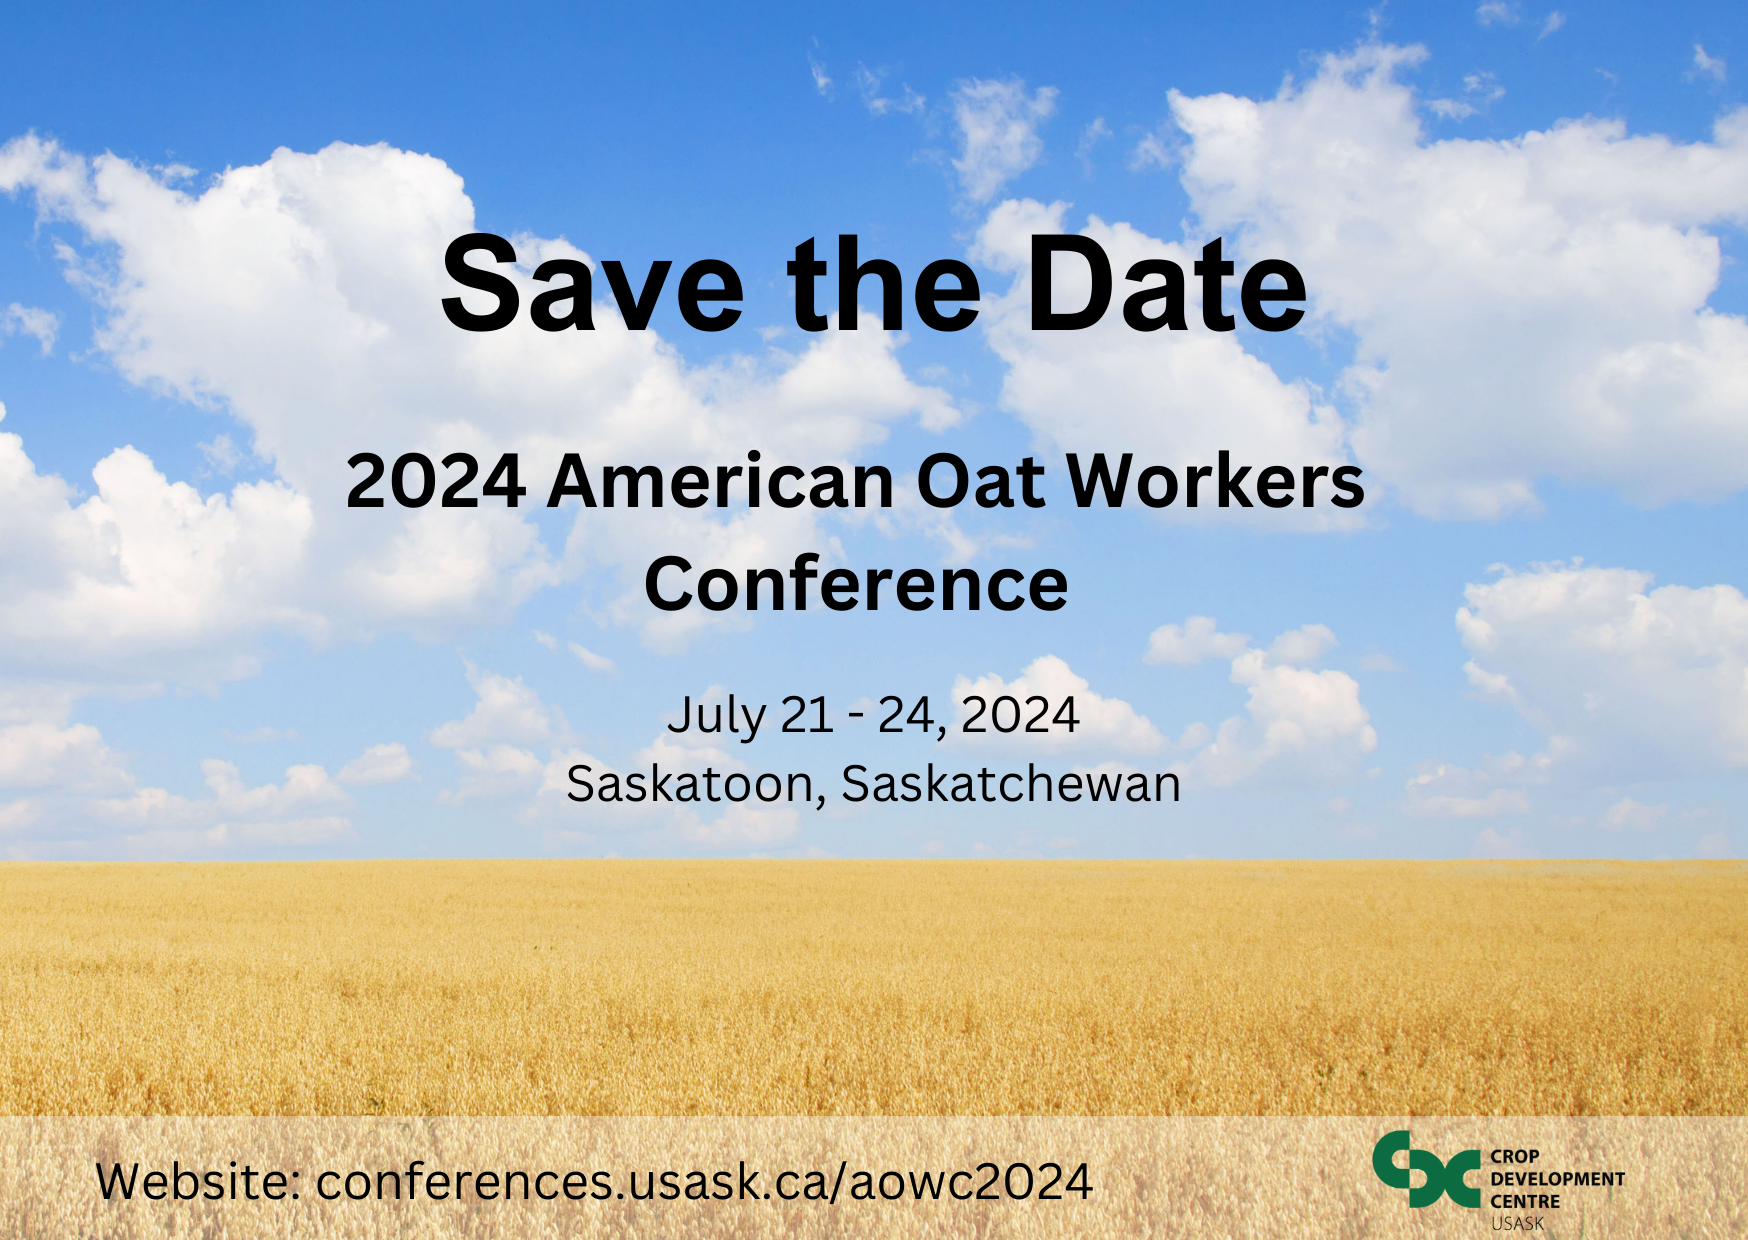 Ad for the 2024 American Oat Workers' Conference